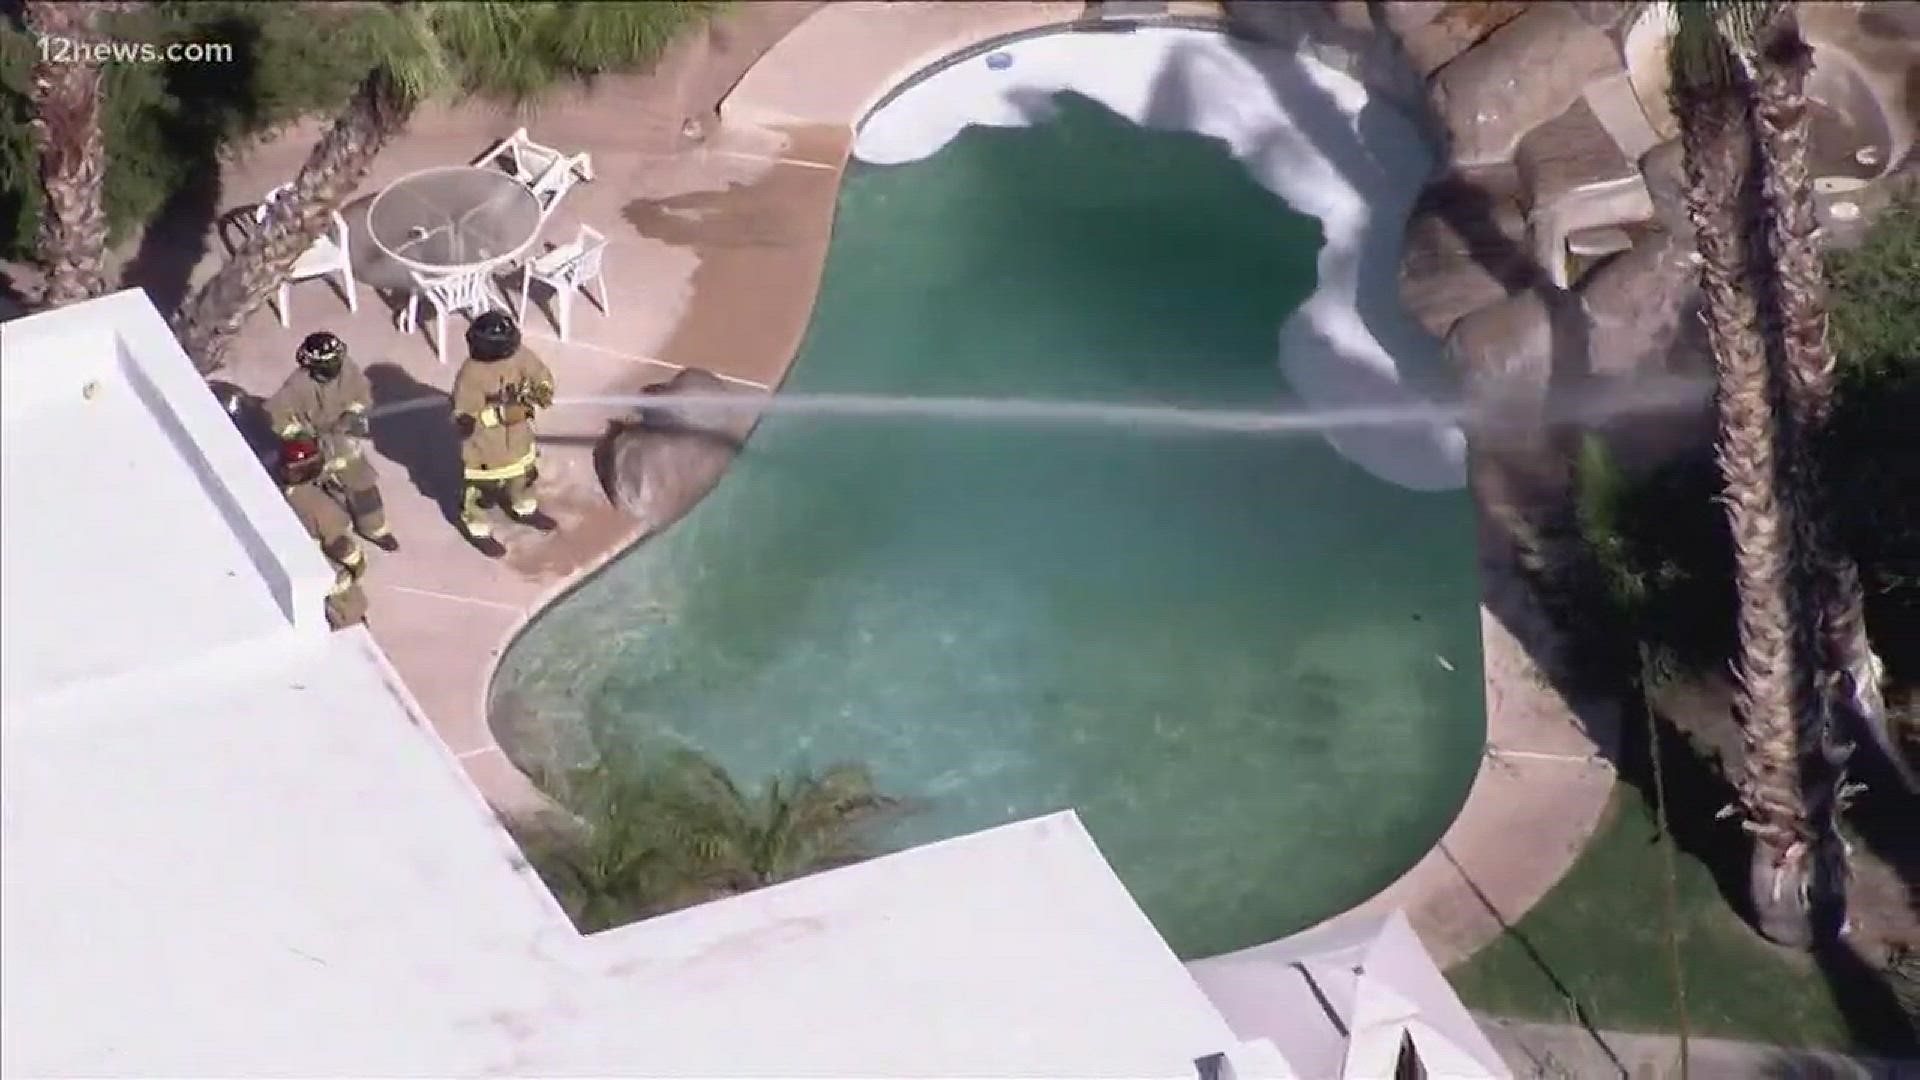 Scottsdale firefighter were able to rescue two from a swarm of bees, but a landscaper, stung multiple times in another area of the city, is in critical condition.